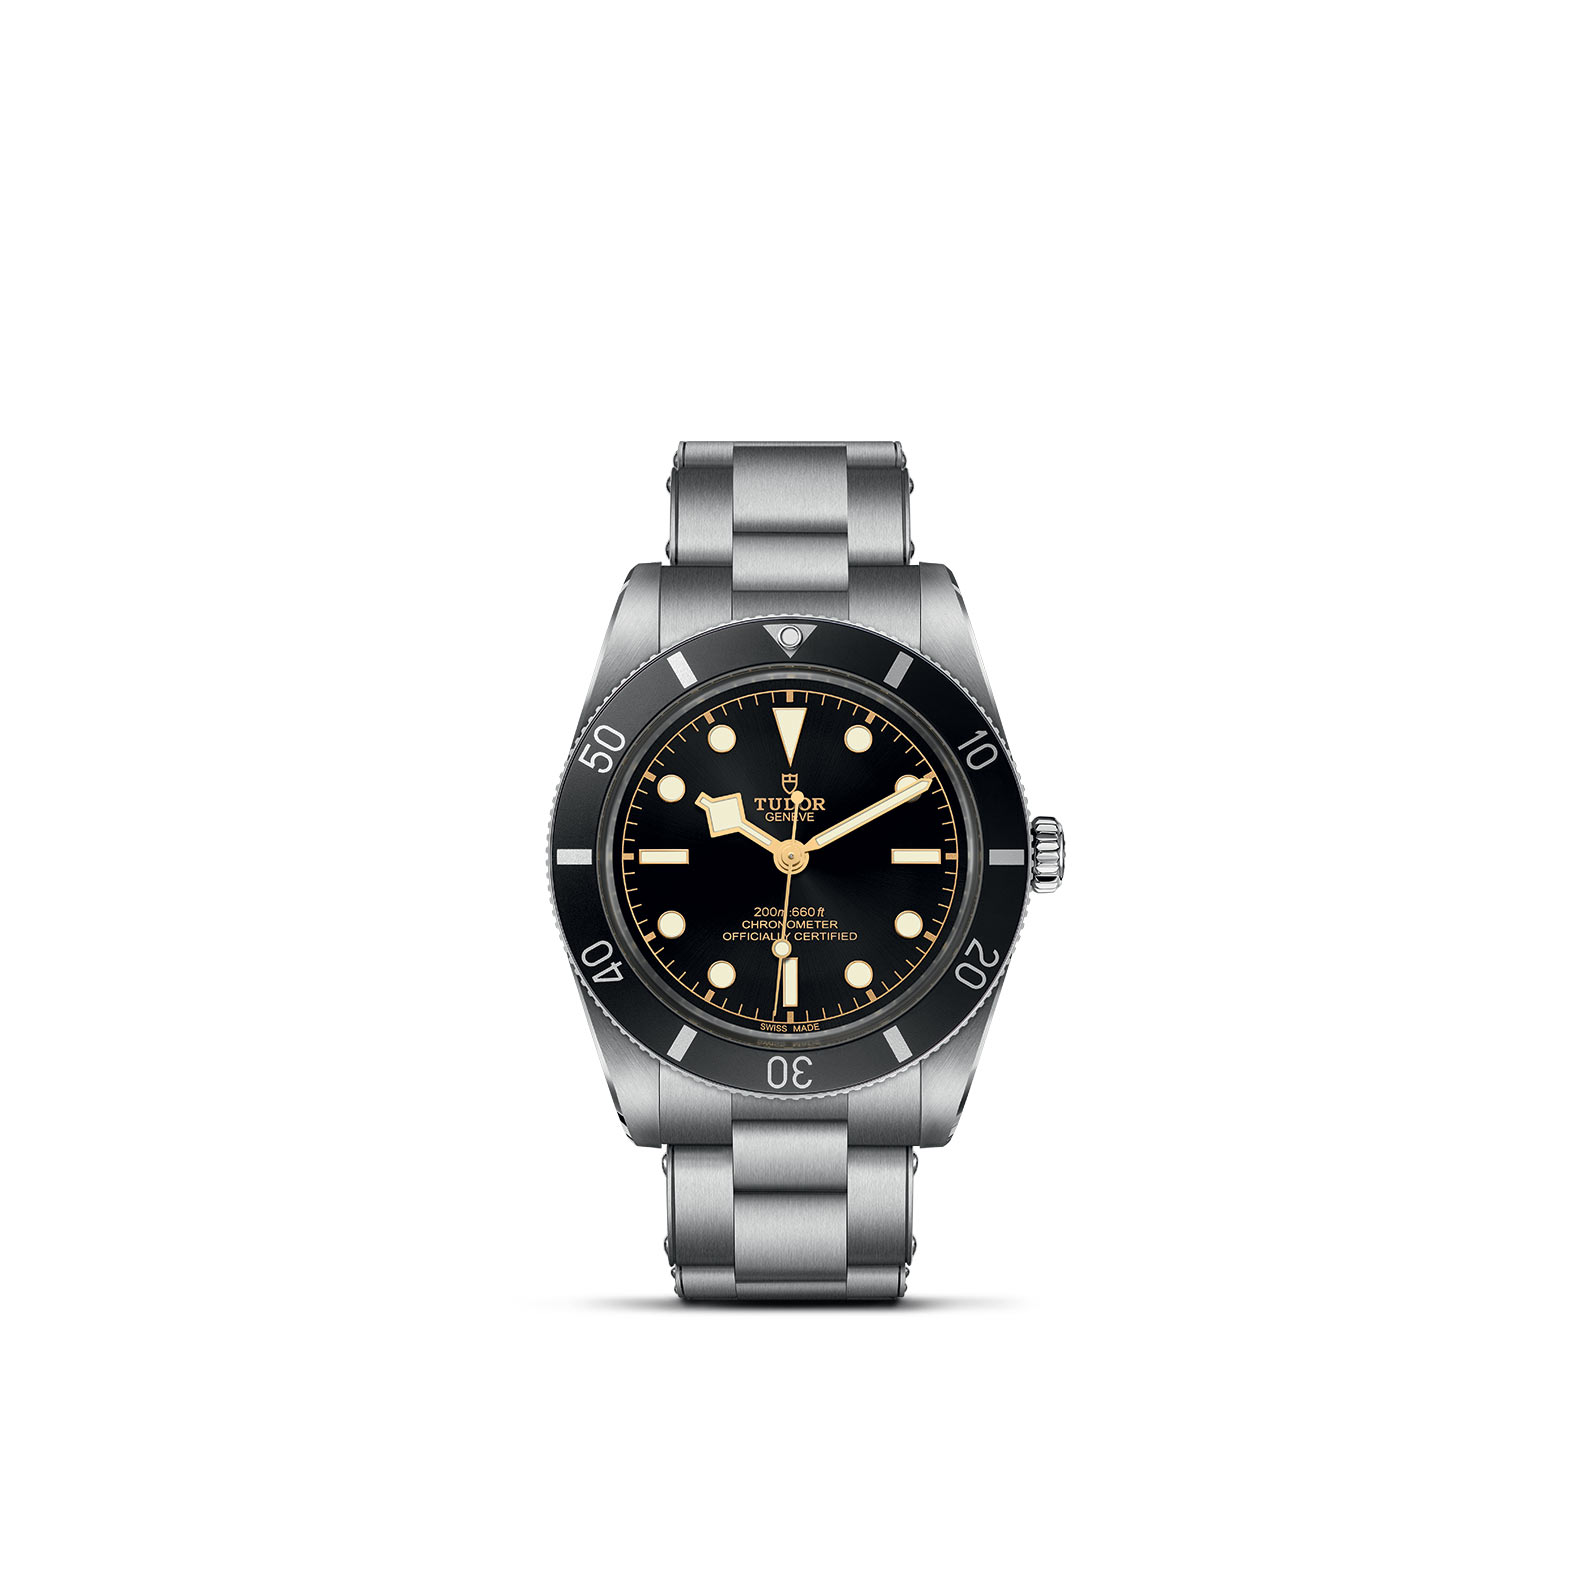 TUDOR BLACK BAY 54 standing upright, highlighting its classic design against a white background.